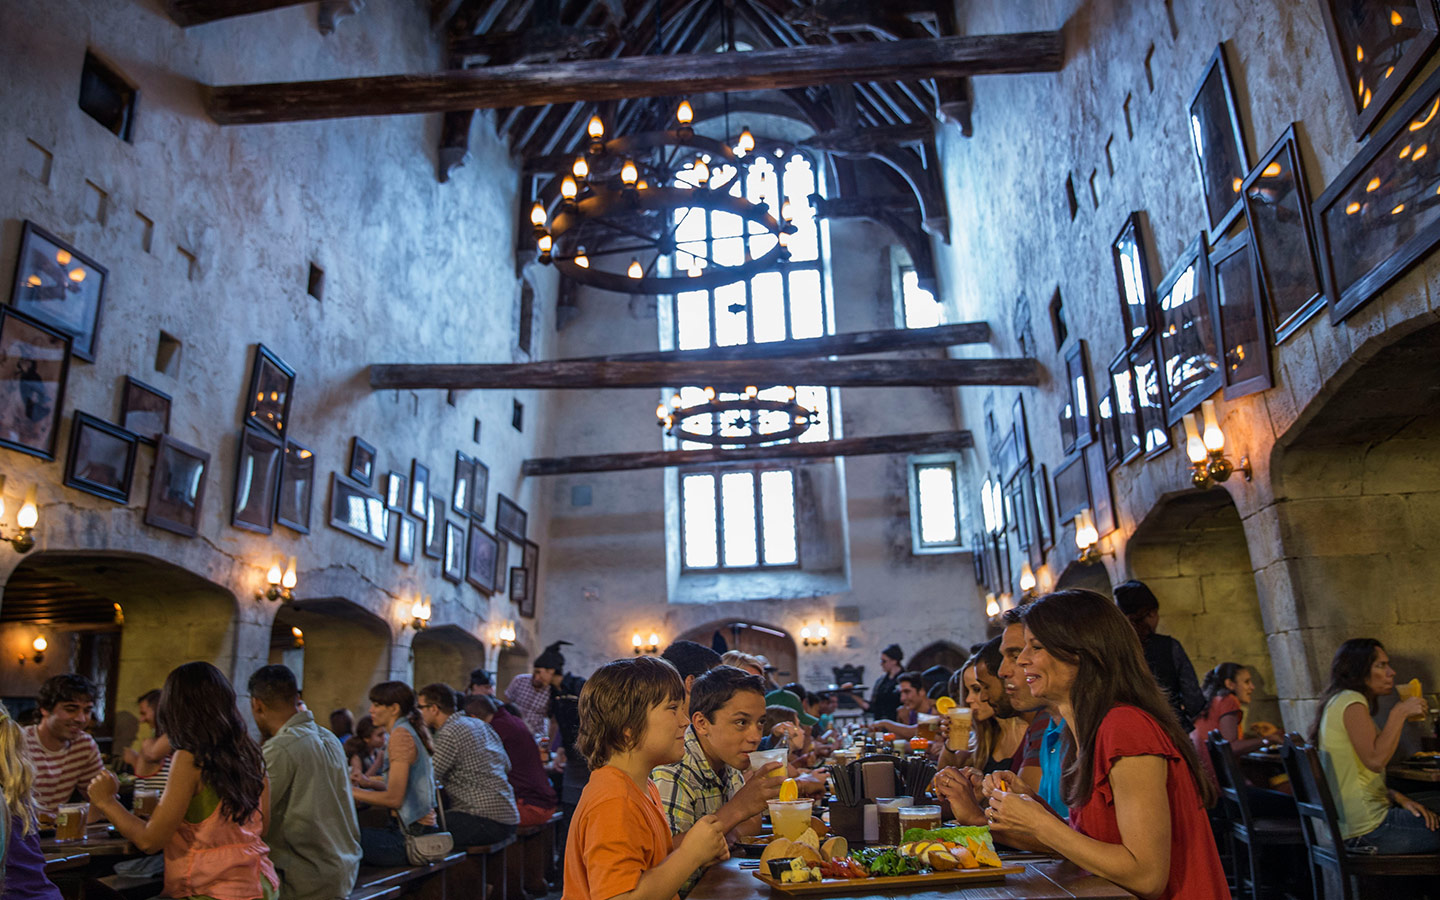 Enjoy a glass of Butterbeer at The Leaky Cauldron at The Wizarding World of Harry Potter - Diagon Alley